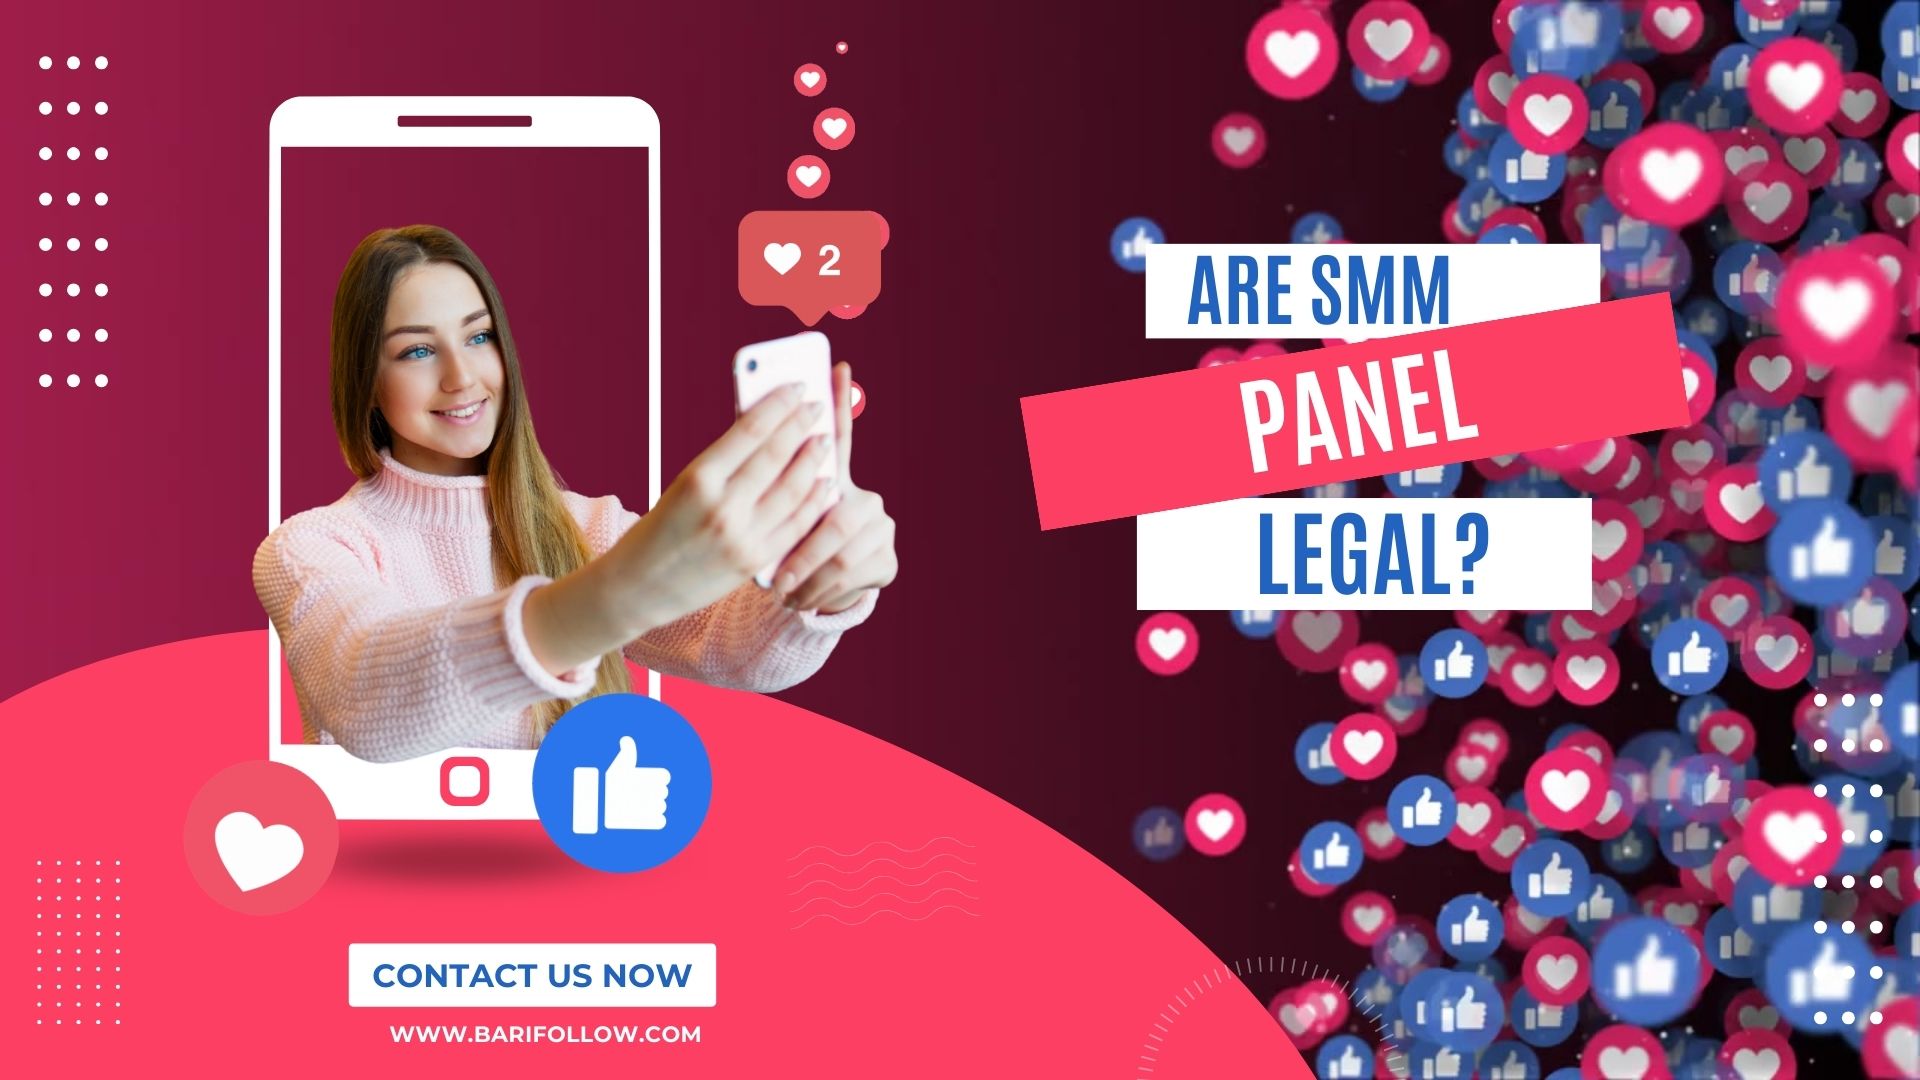 Are SMM Panel Legal?